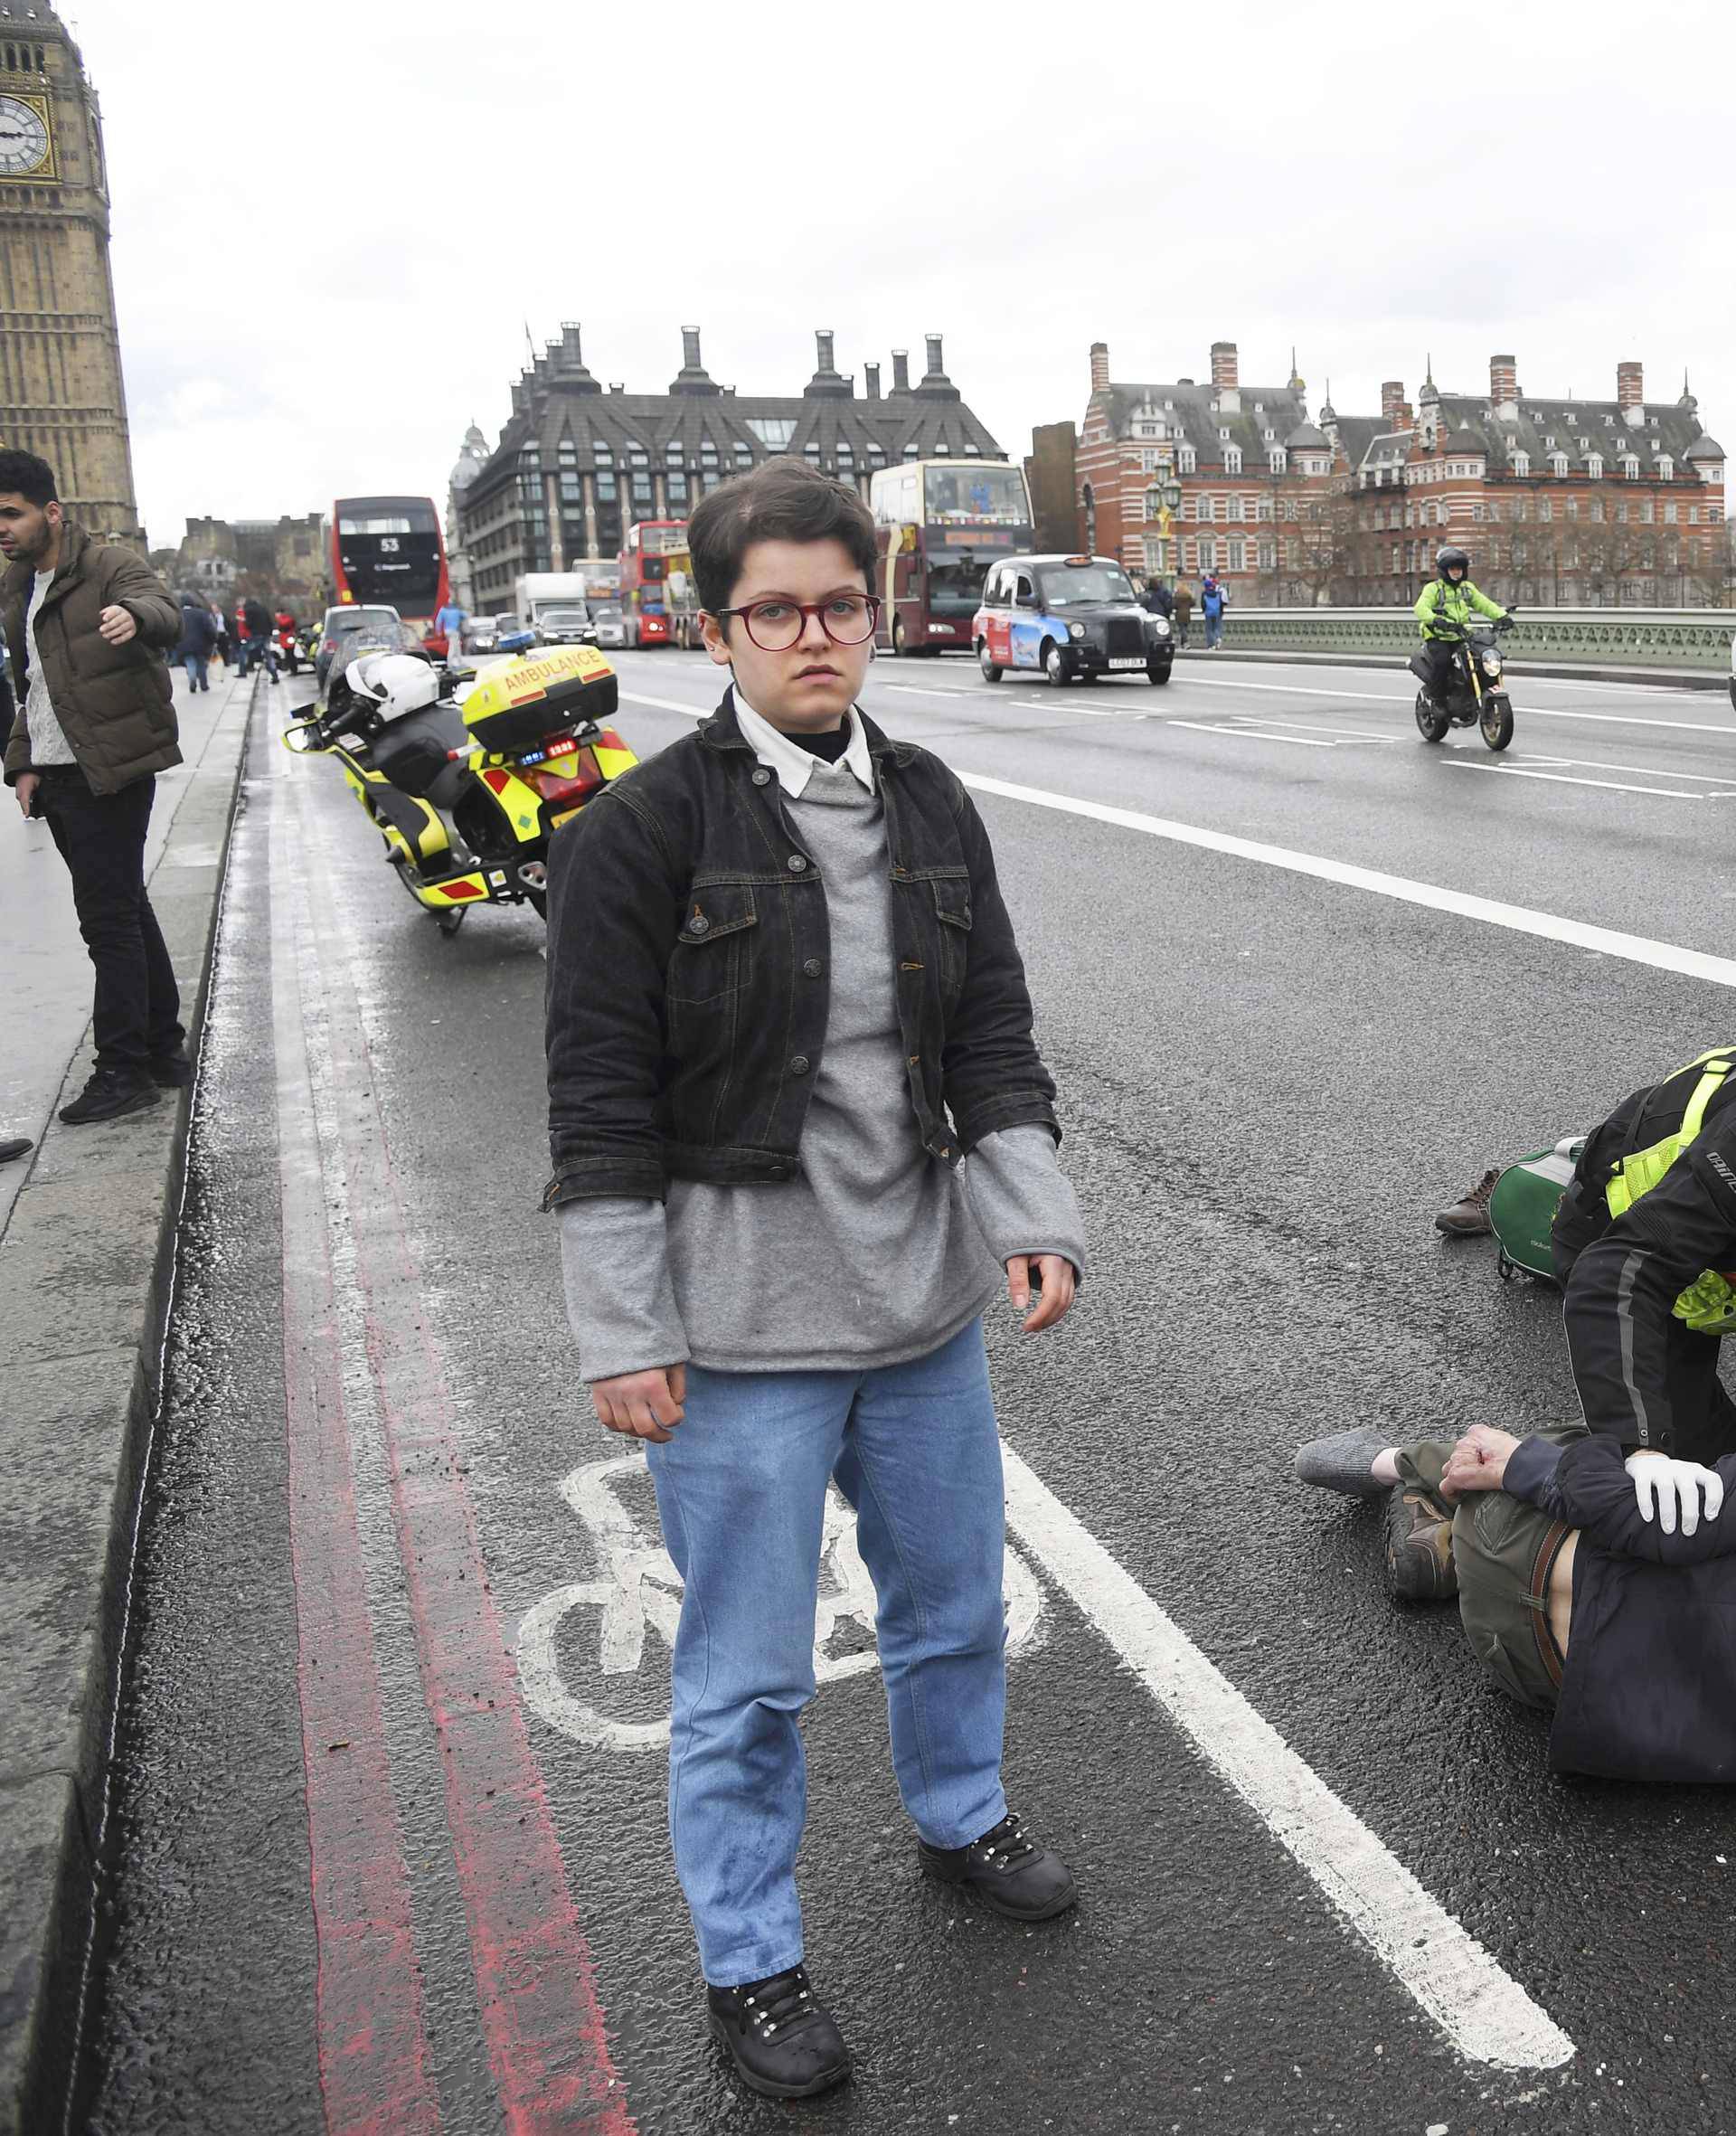 Injured people are assisted after an incident on Westminster Bridge in London